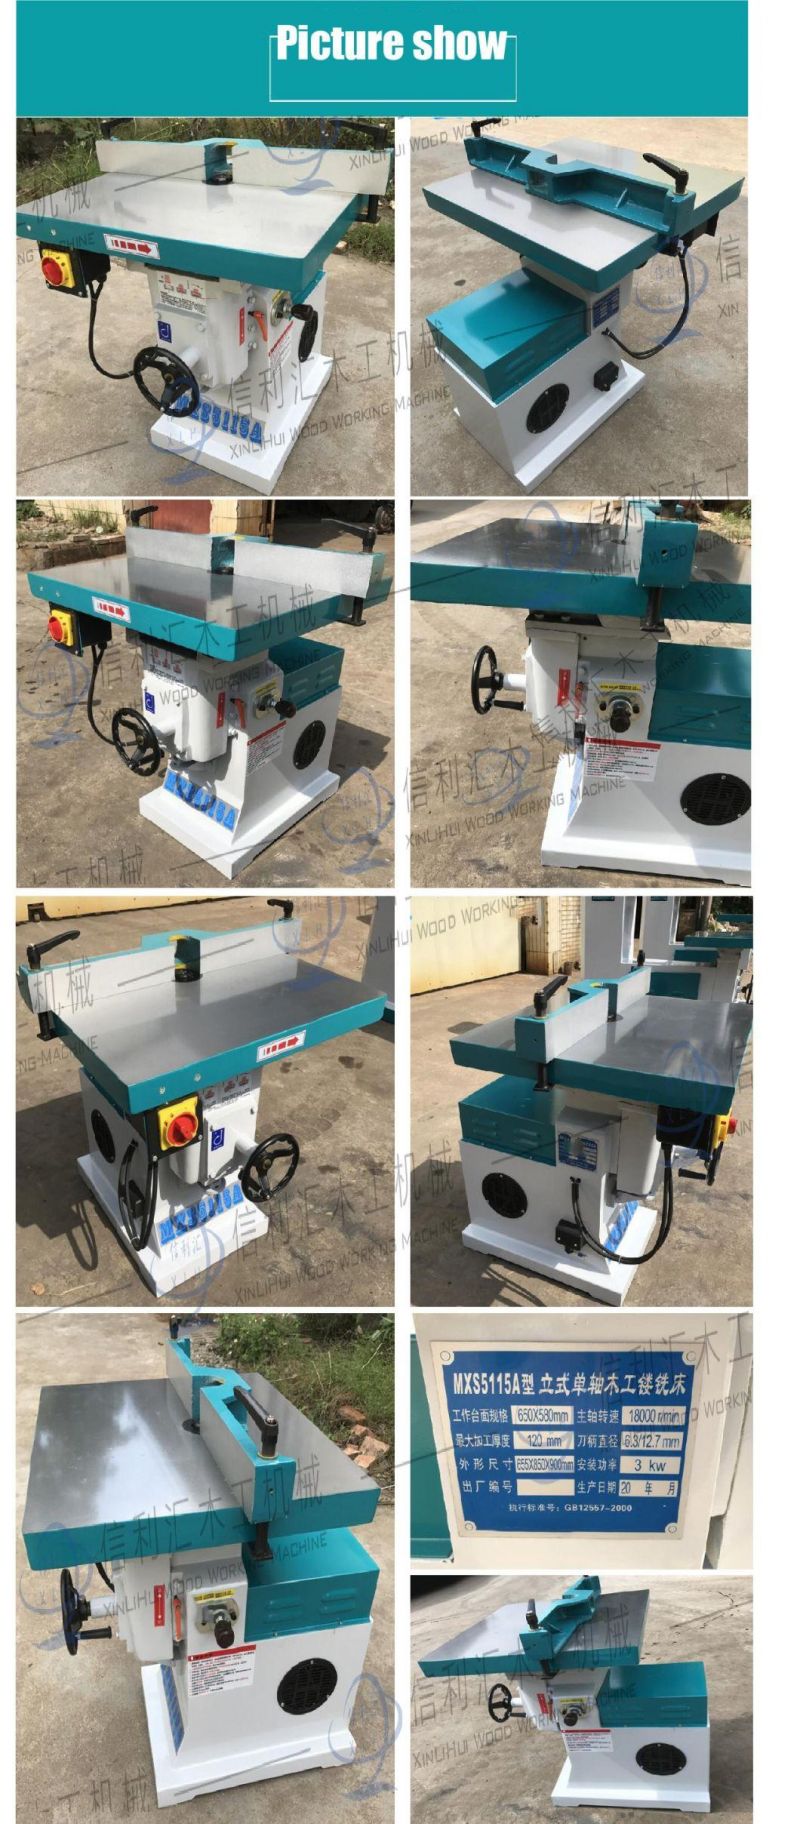 Sliding Table Milling Machine / Drilling Edge Milling Machine / Grinding Milling Table Router Guard for Milling Machines Working Whit Spindle